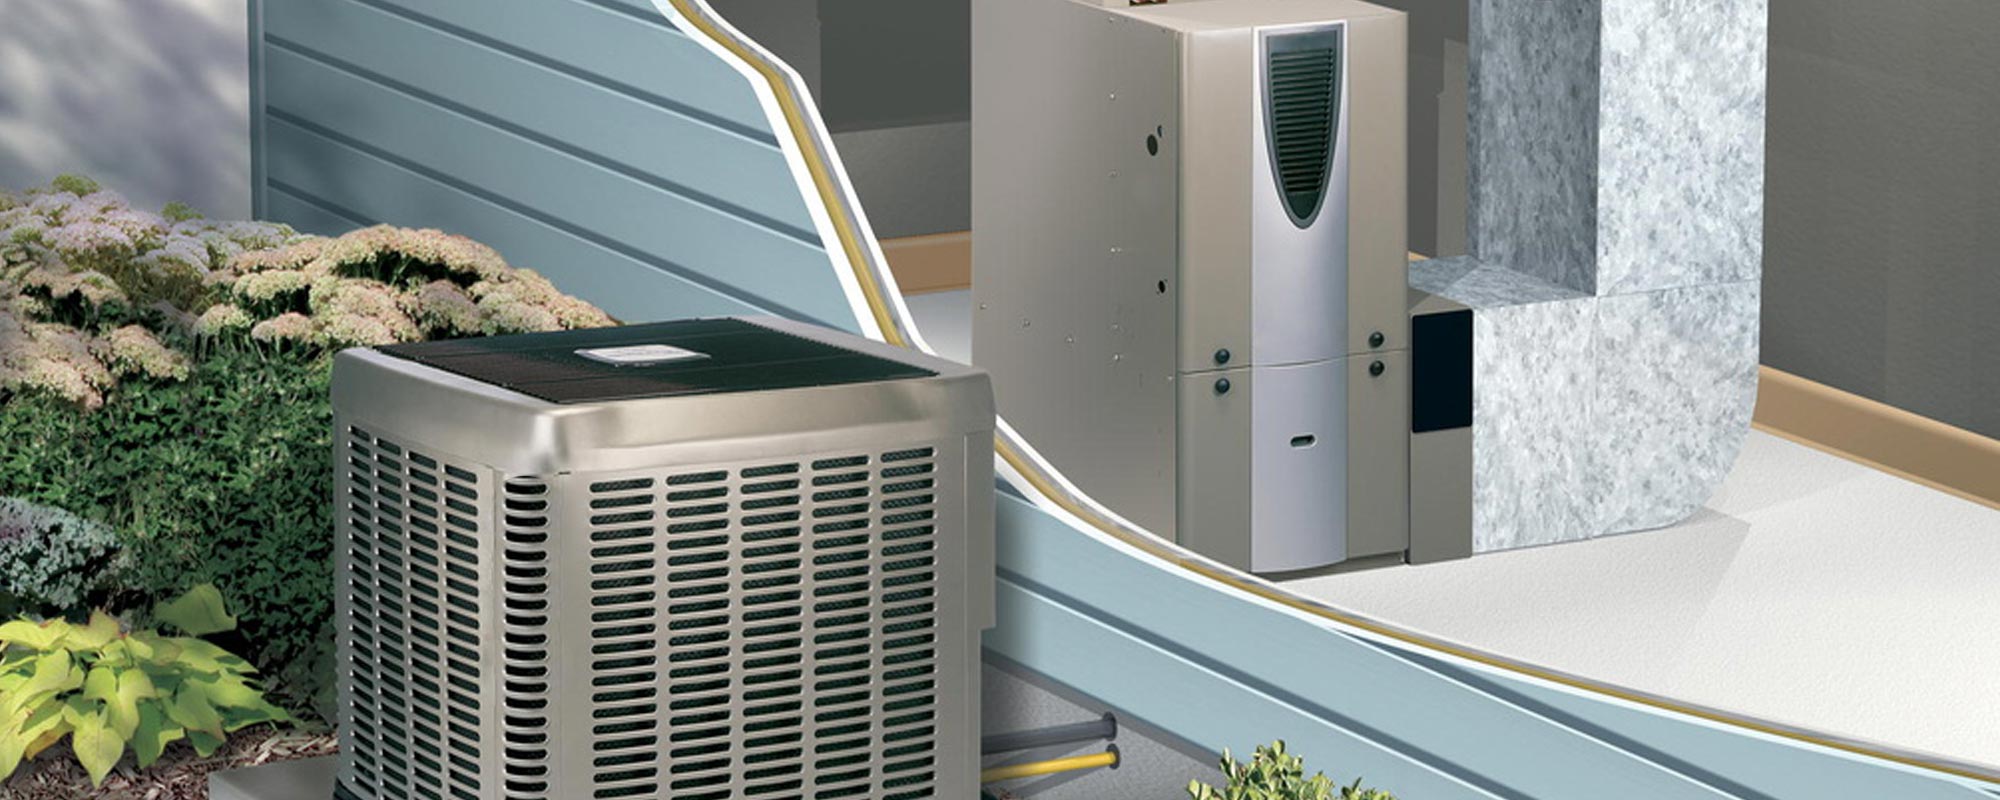 Heat Pump and Air Handler vs Furnace: What’s the Difference?